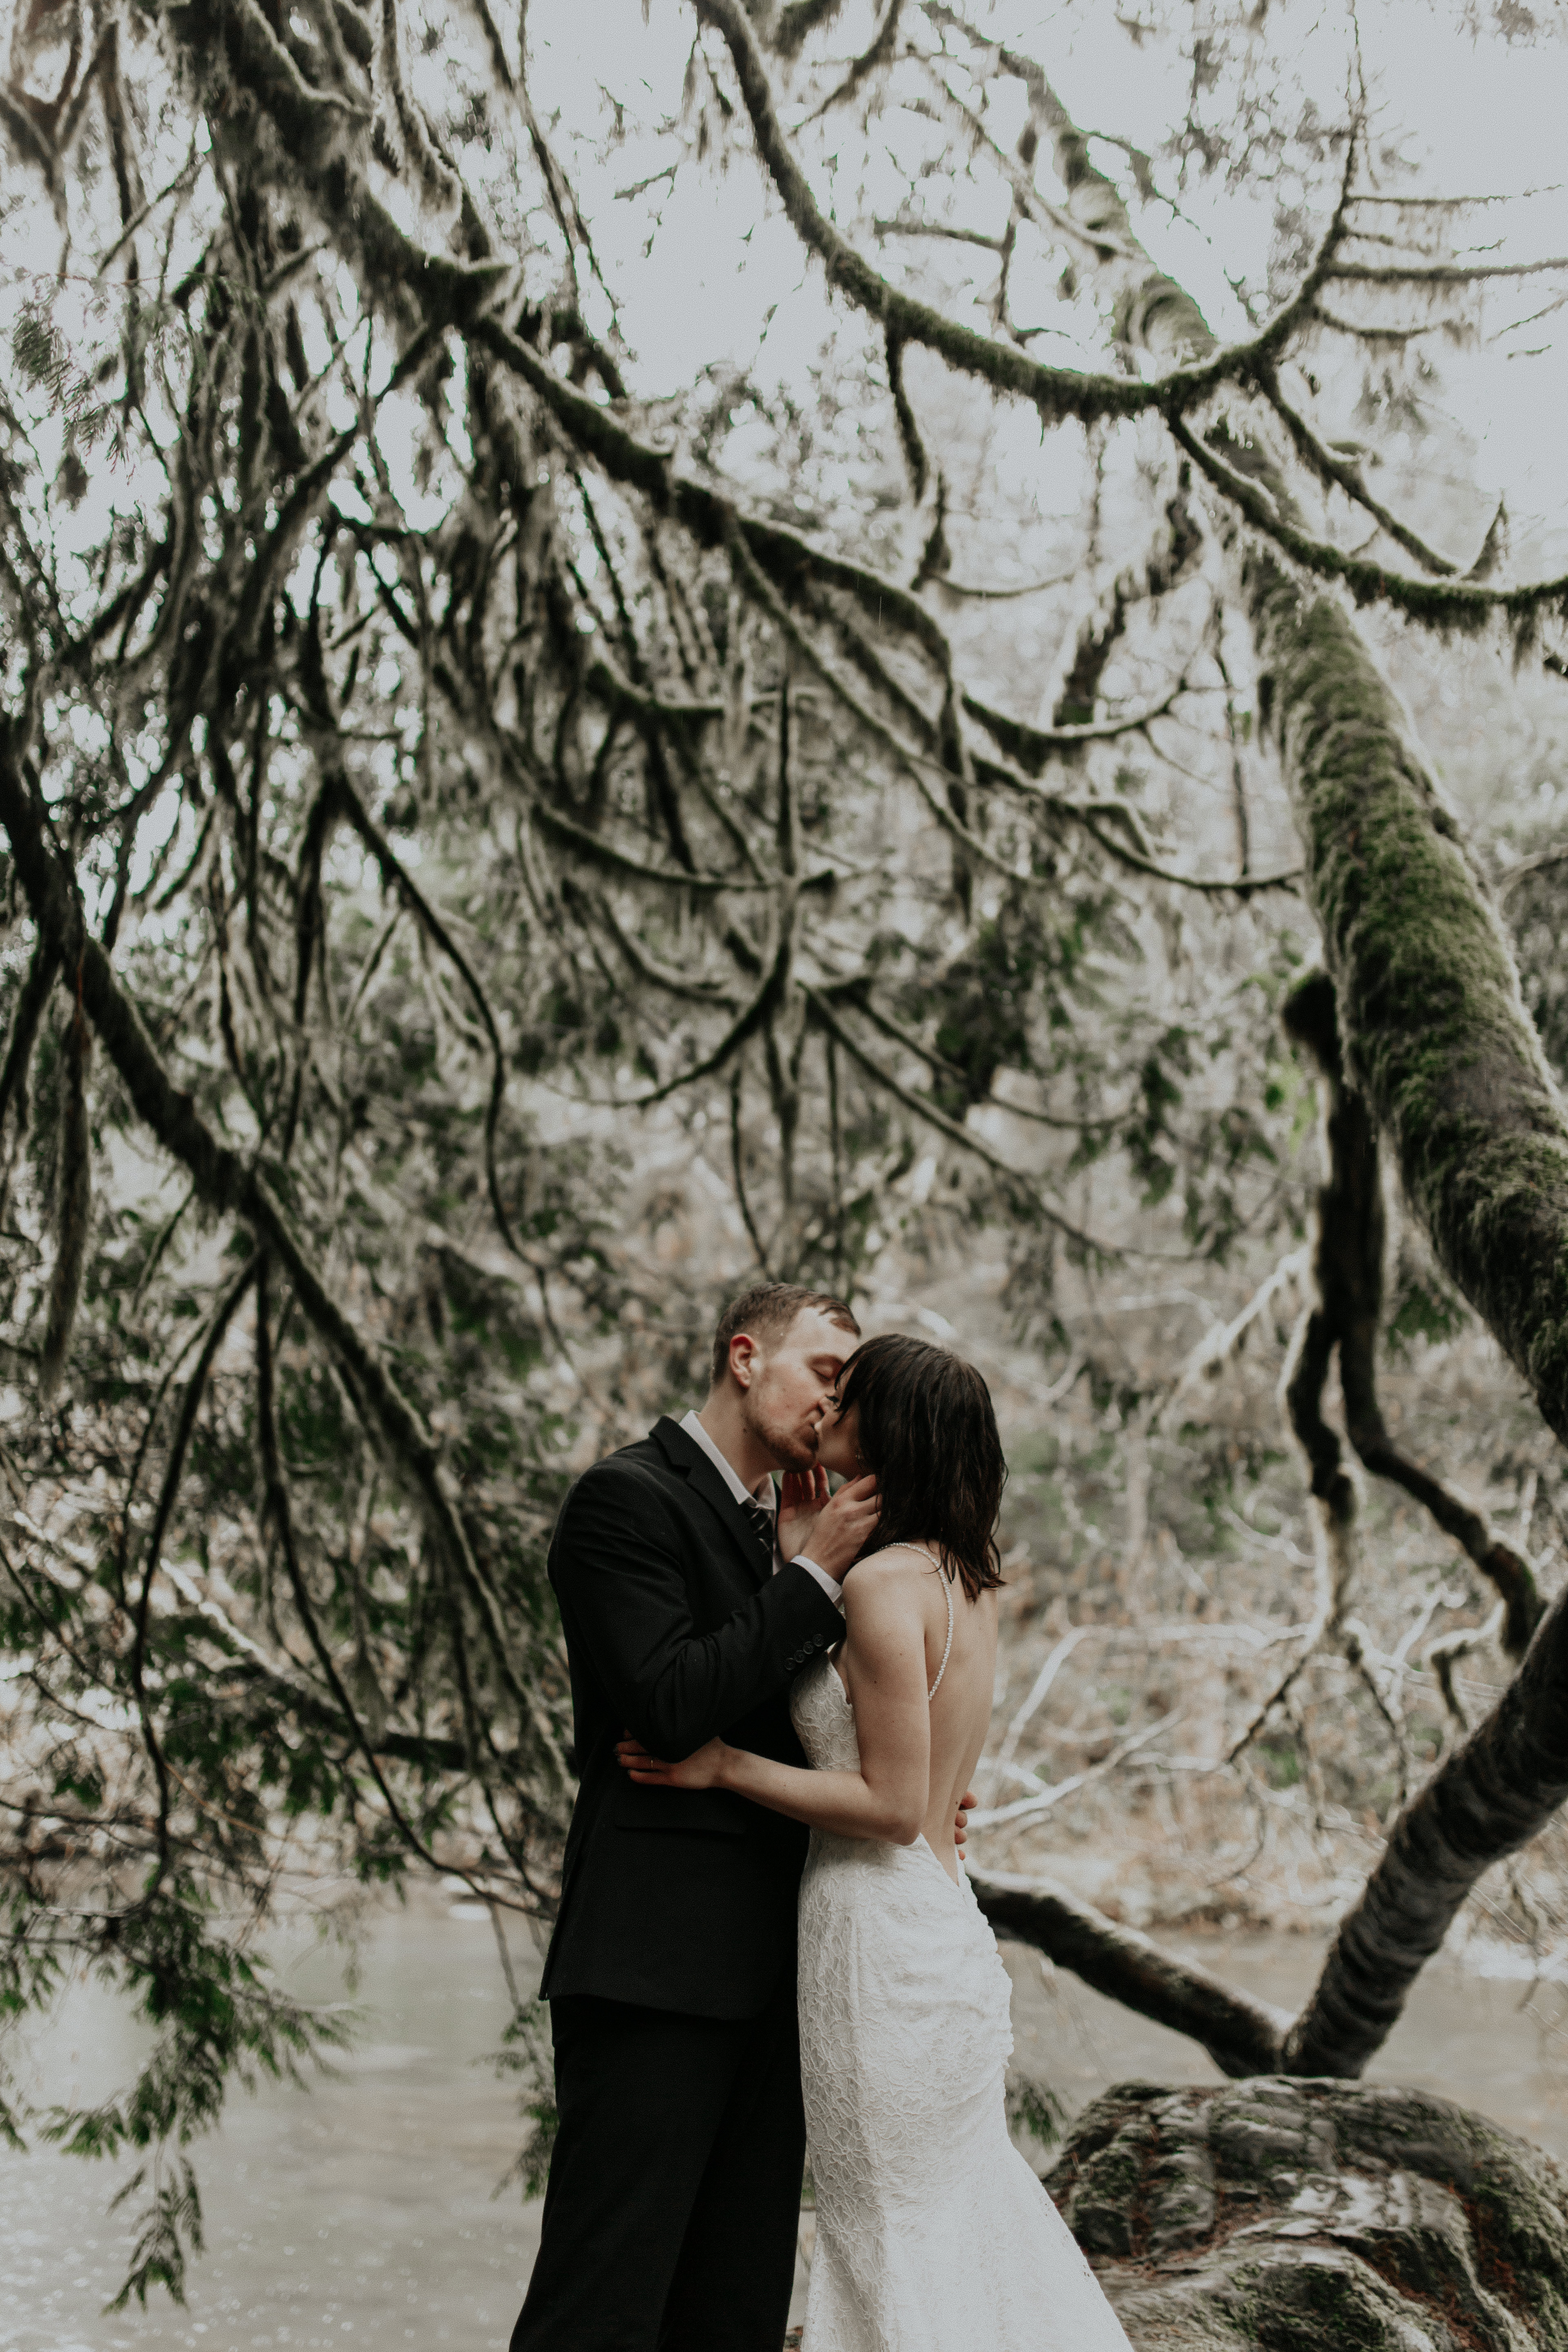 TJ and Paige find shelter under a tree alongside Moulton Falls river in Washington for their adventure wedding.